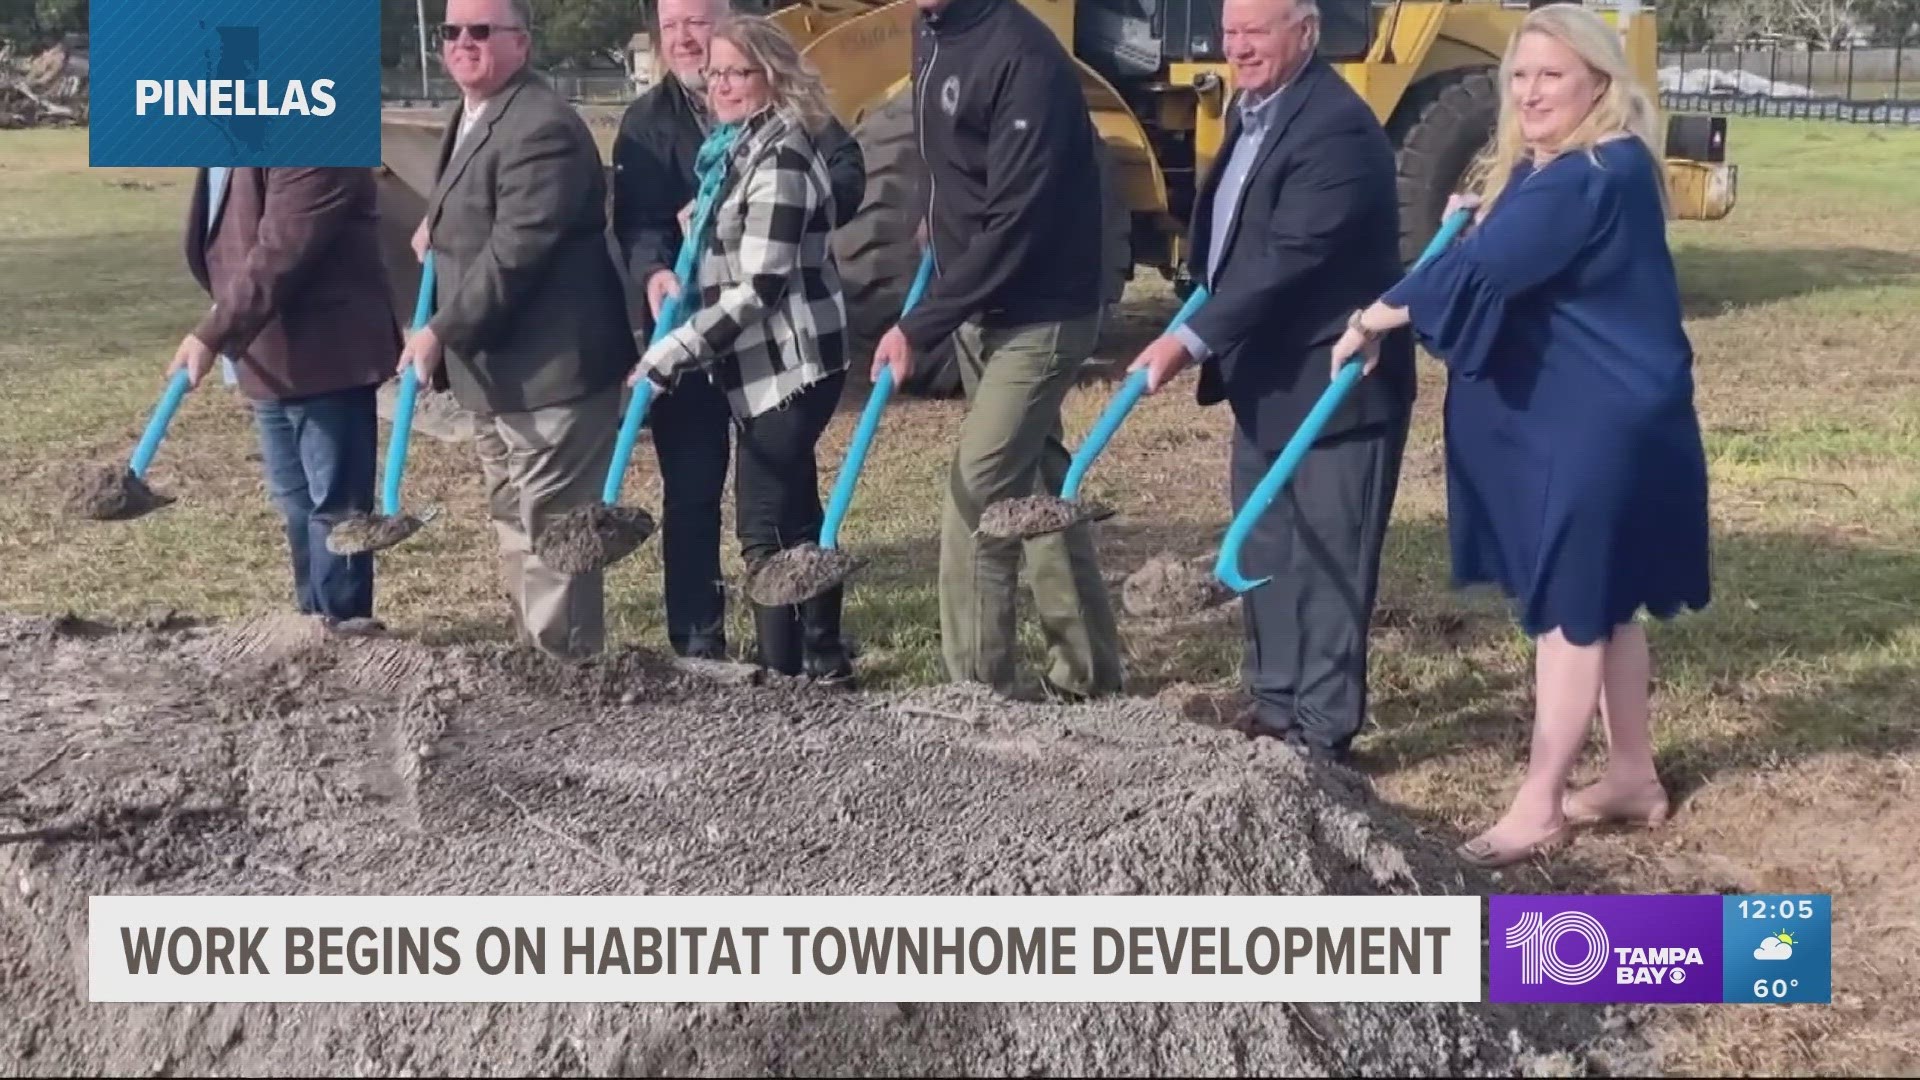 The new development, which broke ground on Wednesday on Long Lake Preserve, will include 54 townhomes for people who complete HFH's Home Ownership Program.